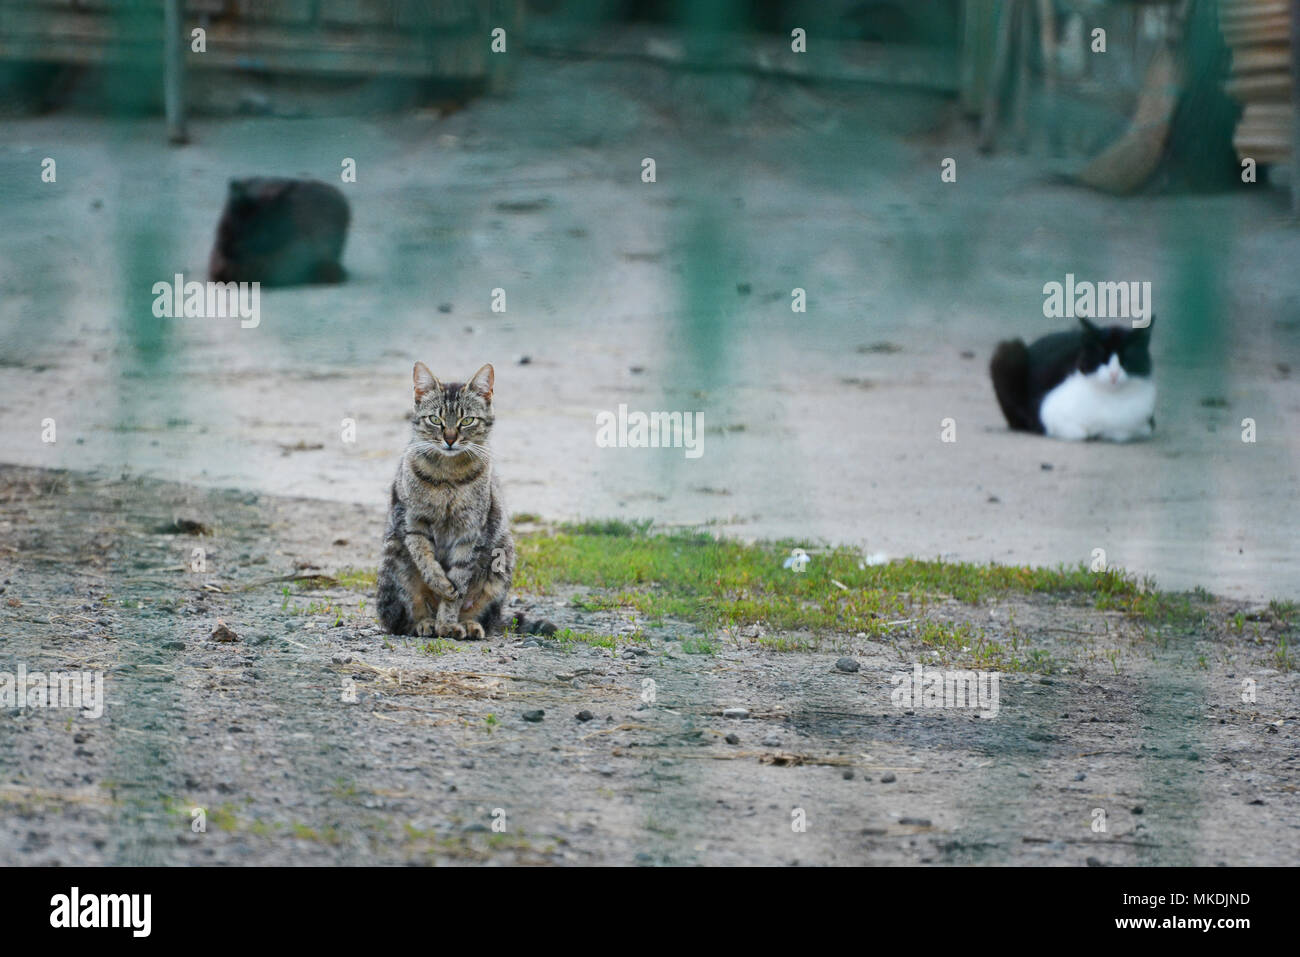 Stray cats. Domestic cats in rural side. Stock Photo